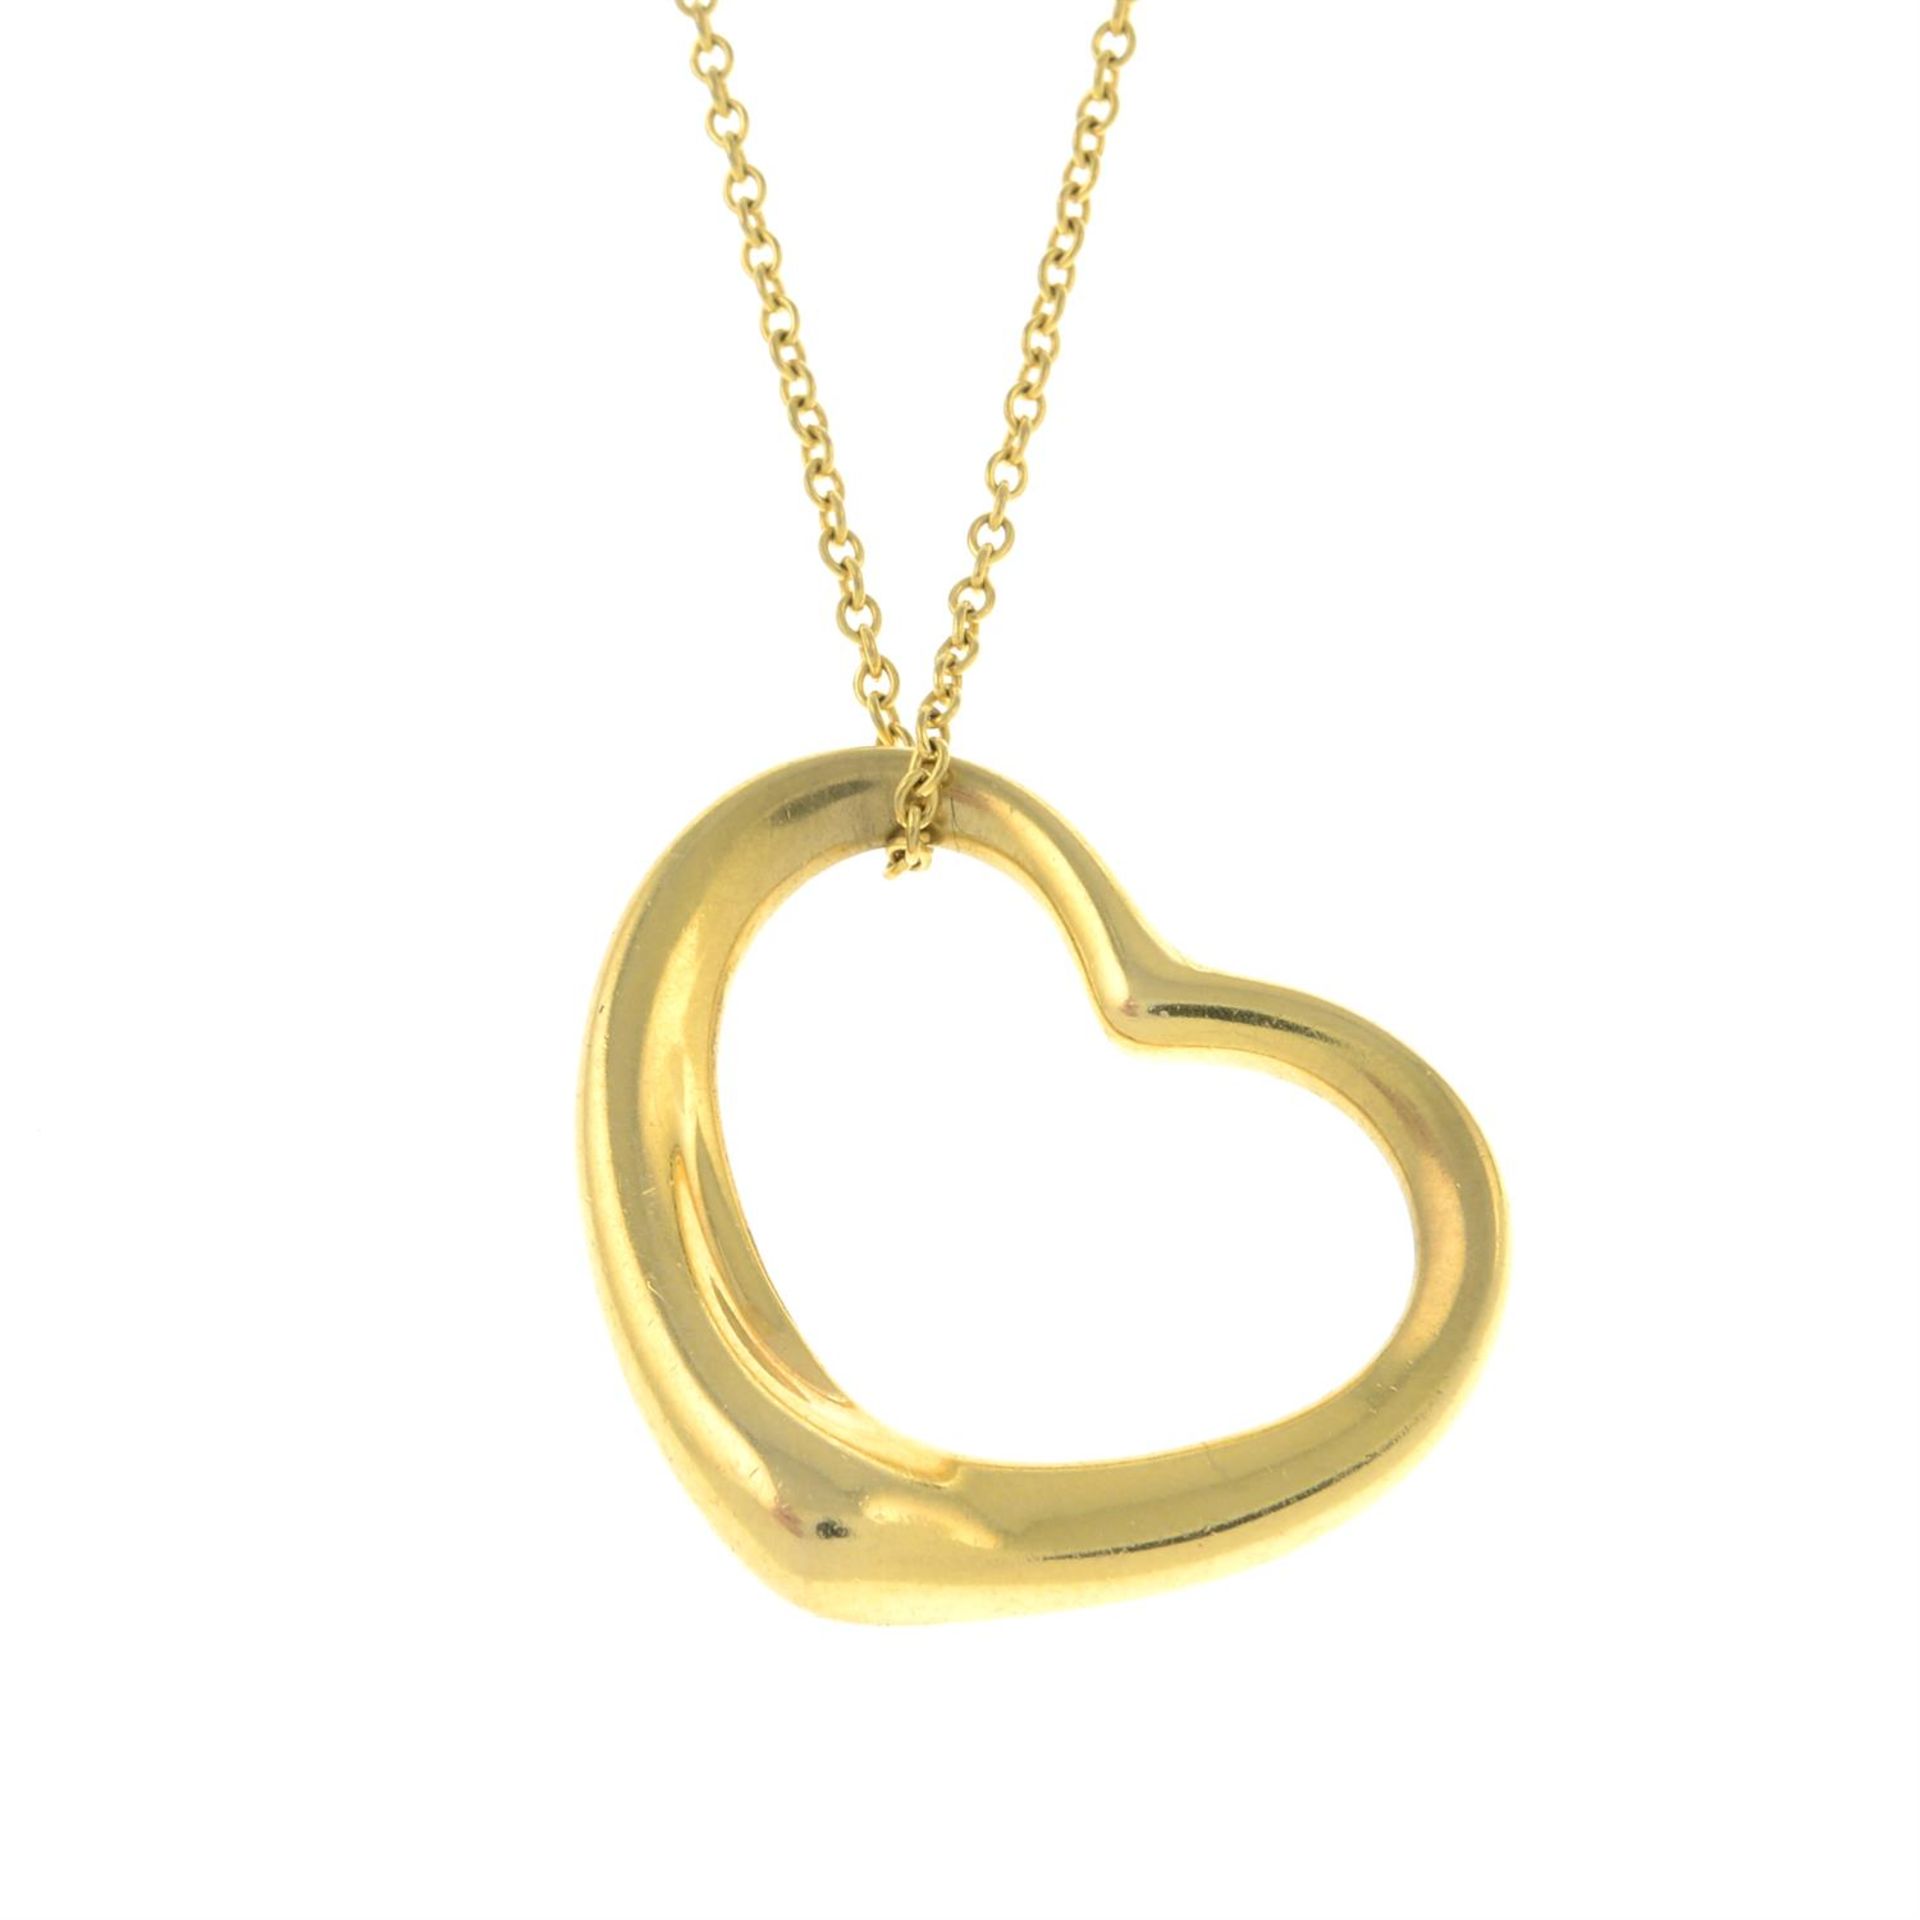 An 'Open Heart' pendant, with chain, by Elsa Peretti for Tiffany & Co.